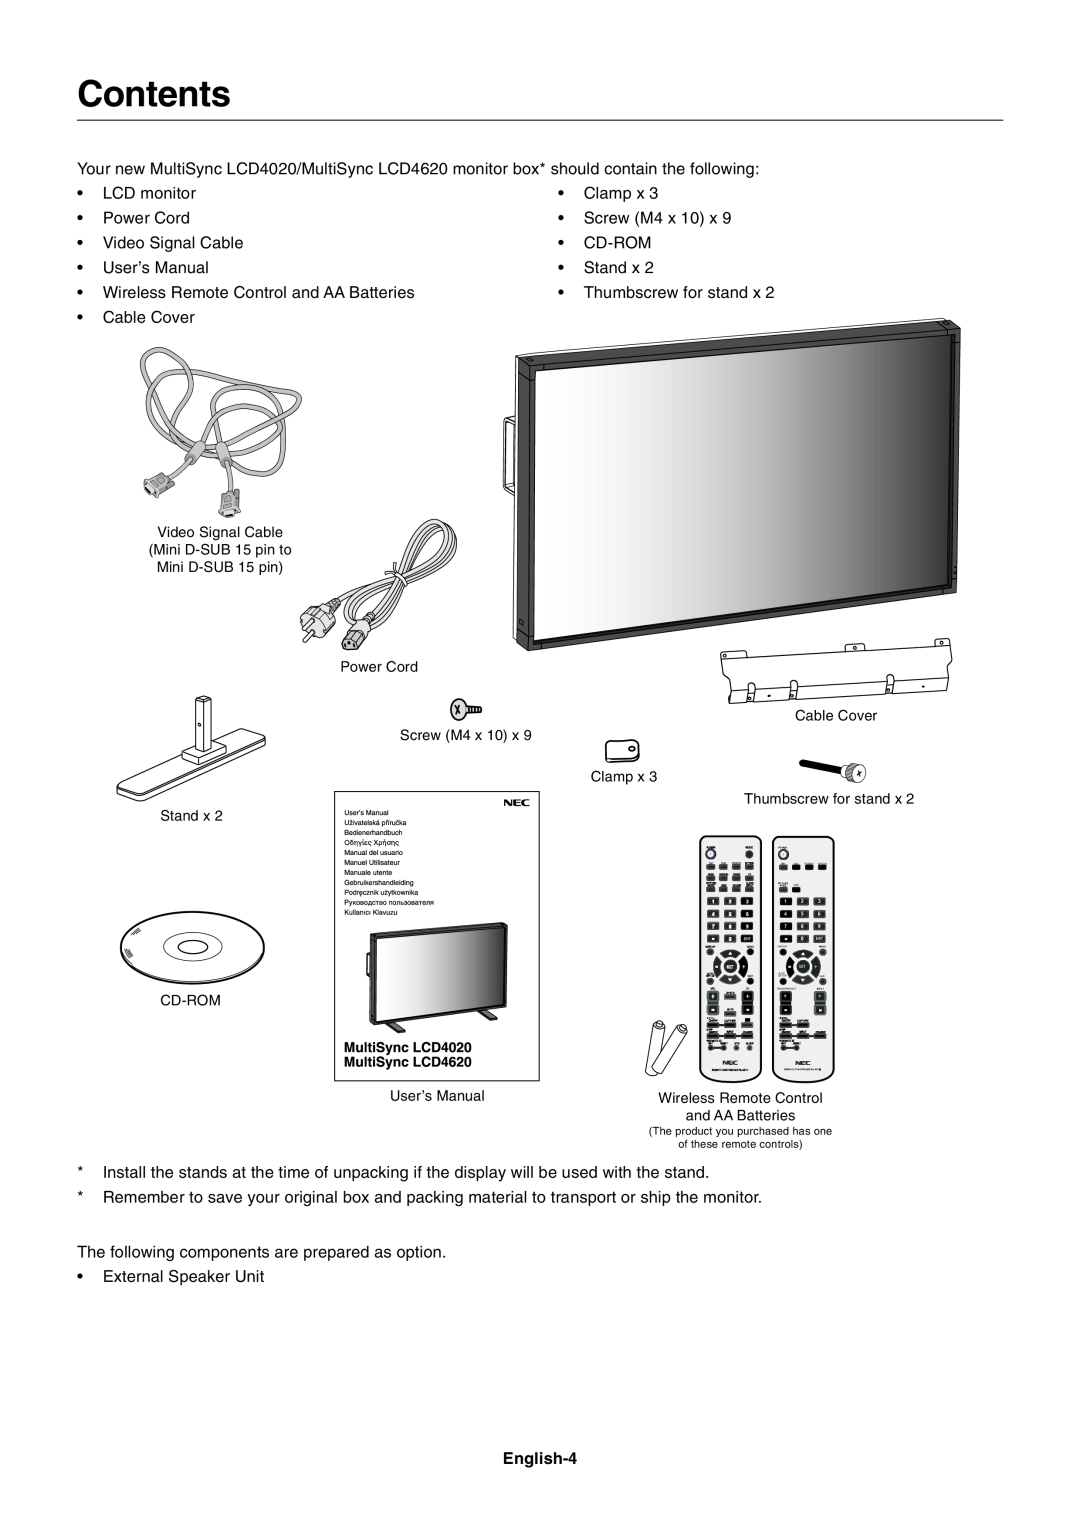 NEC LCD4020, LCD4620 user manual Contents, English-4 